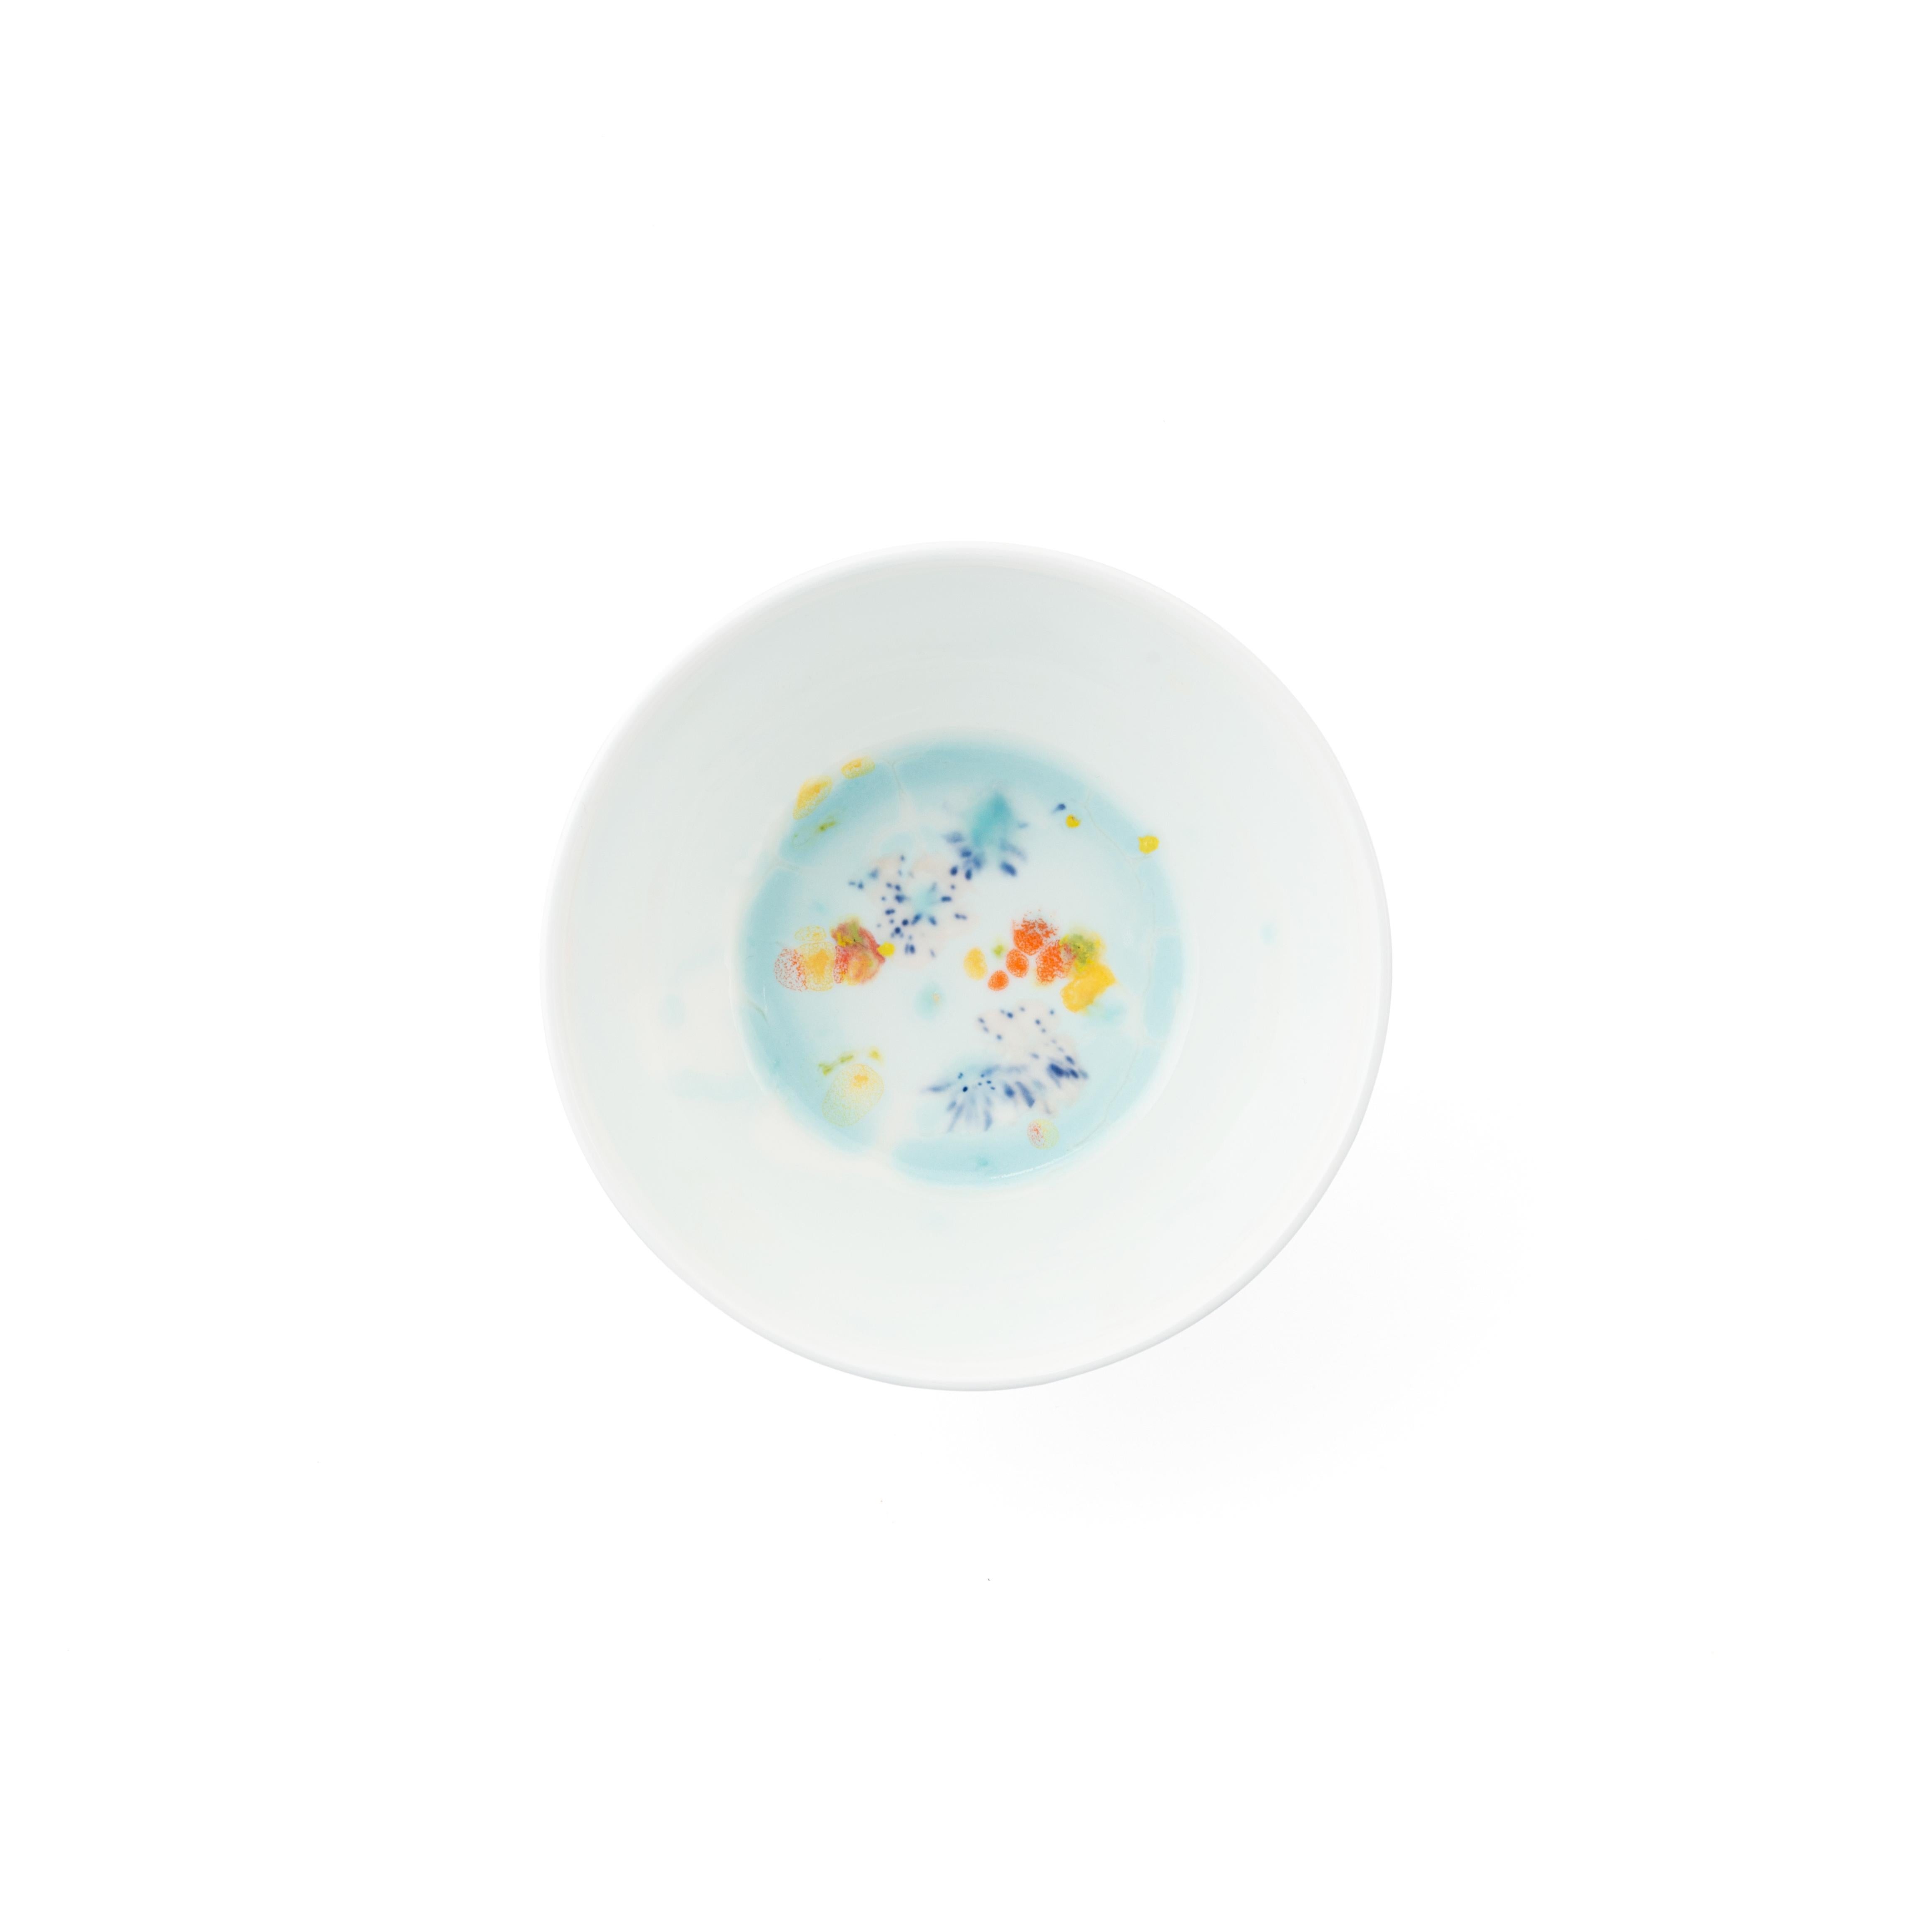 Handcrafted in Italy from the finest porcelain, these blue seabed fruit bowls have corals lying on a bright bottom surrounded by mysterious multicolored gems floating amid brushes of light pink sand sprinkled with black dots.

Set of 2 blue seabed